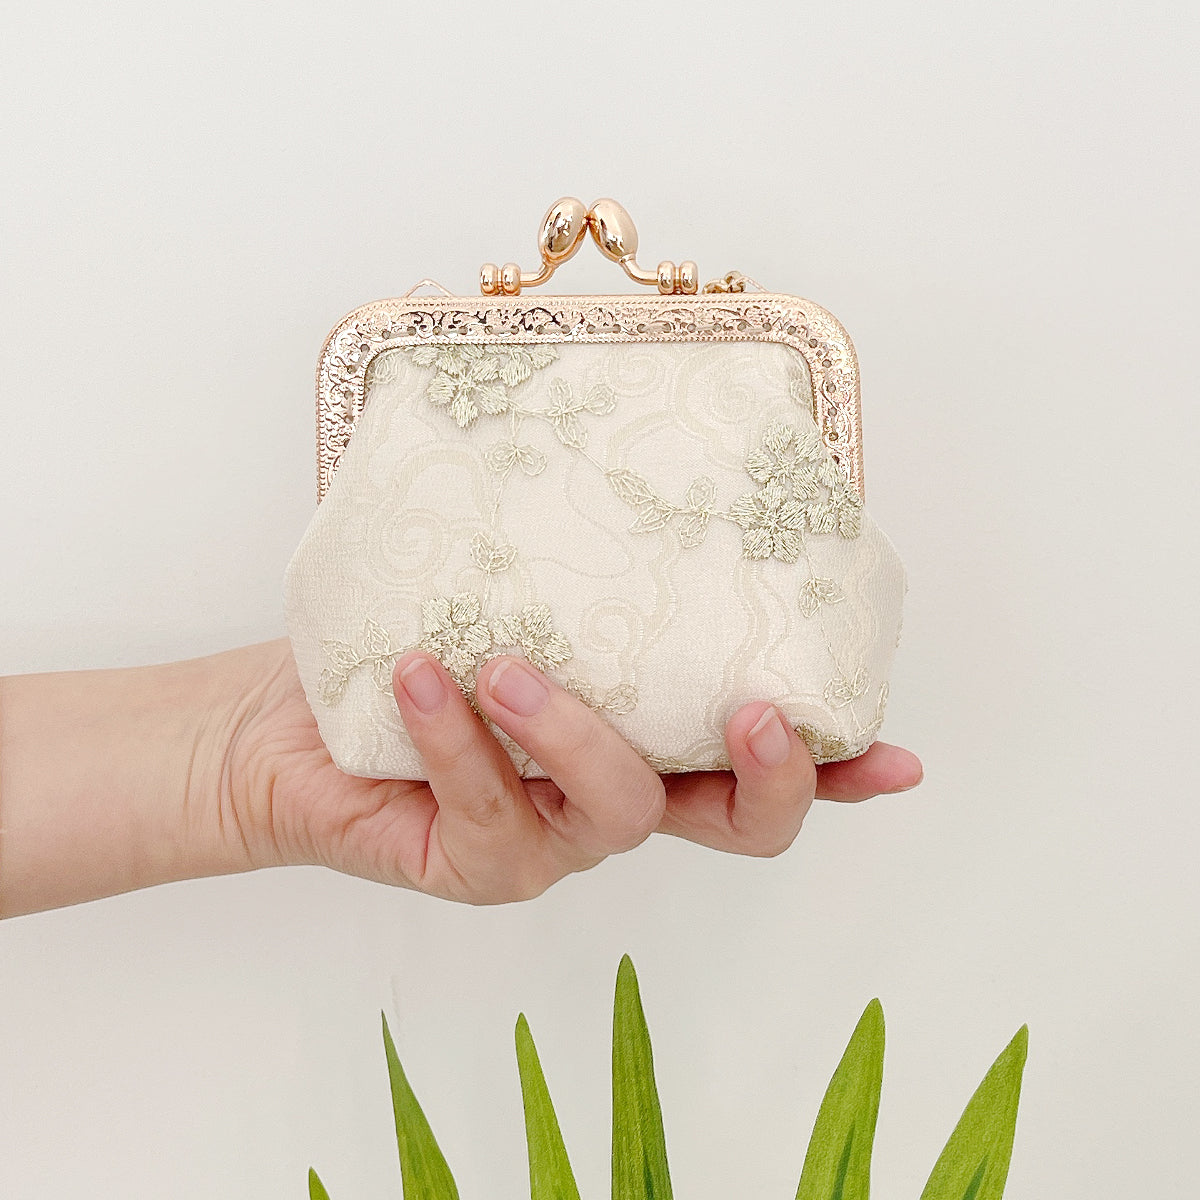 Handmade Bridal Clutch Purse In Ivory Lace With Pom Pom Flowers by